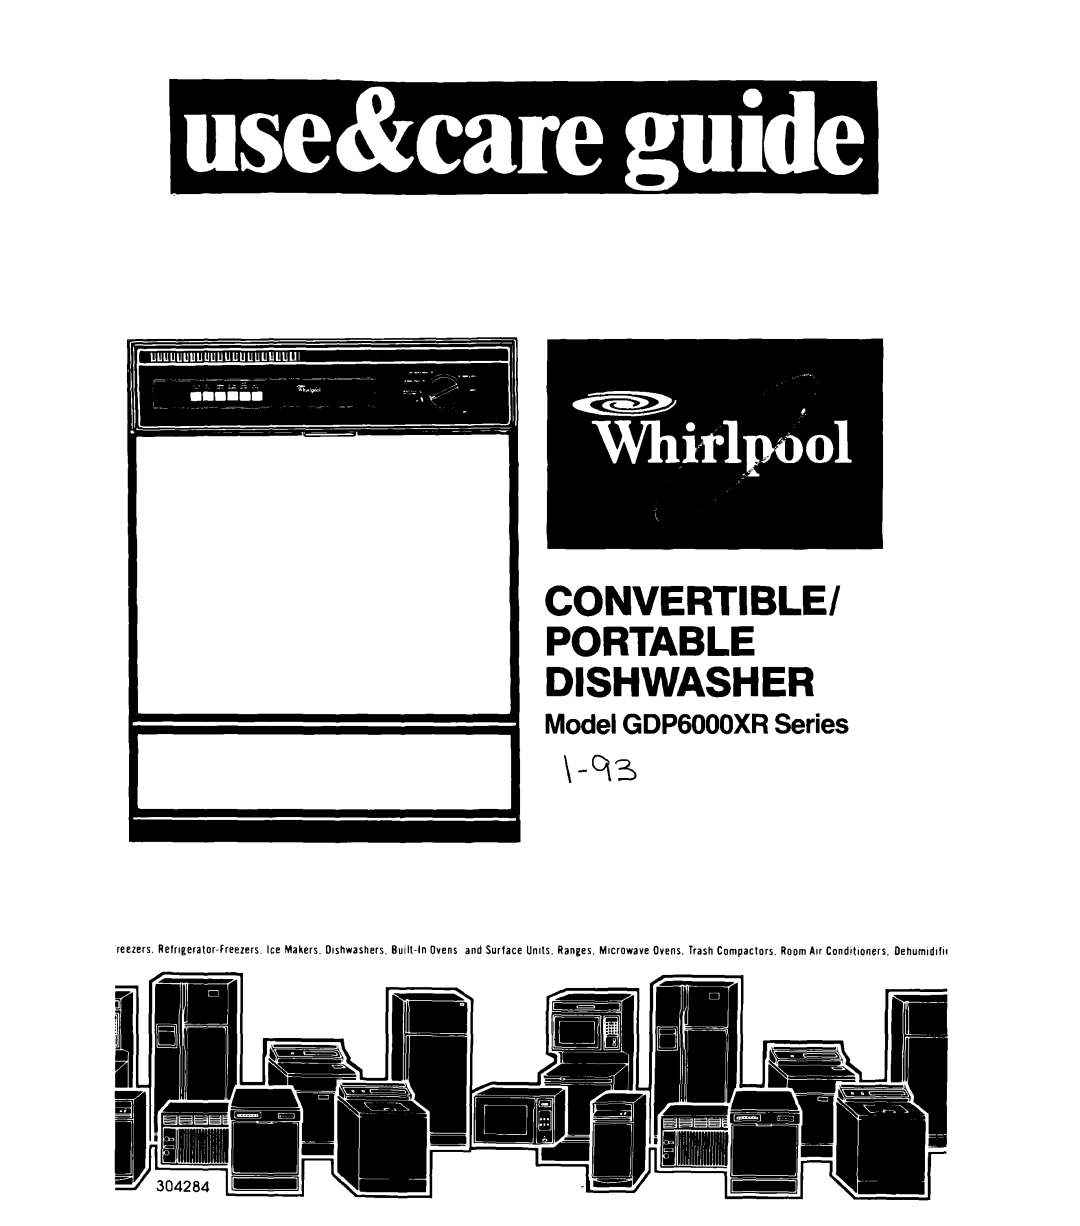 Whirlpool manual Model GDP6000XR Series \-93, Convertible Portable Dishwasher 